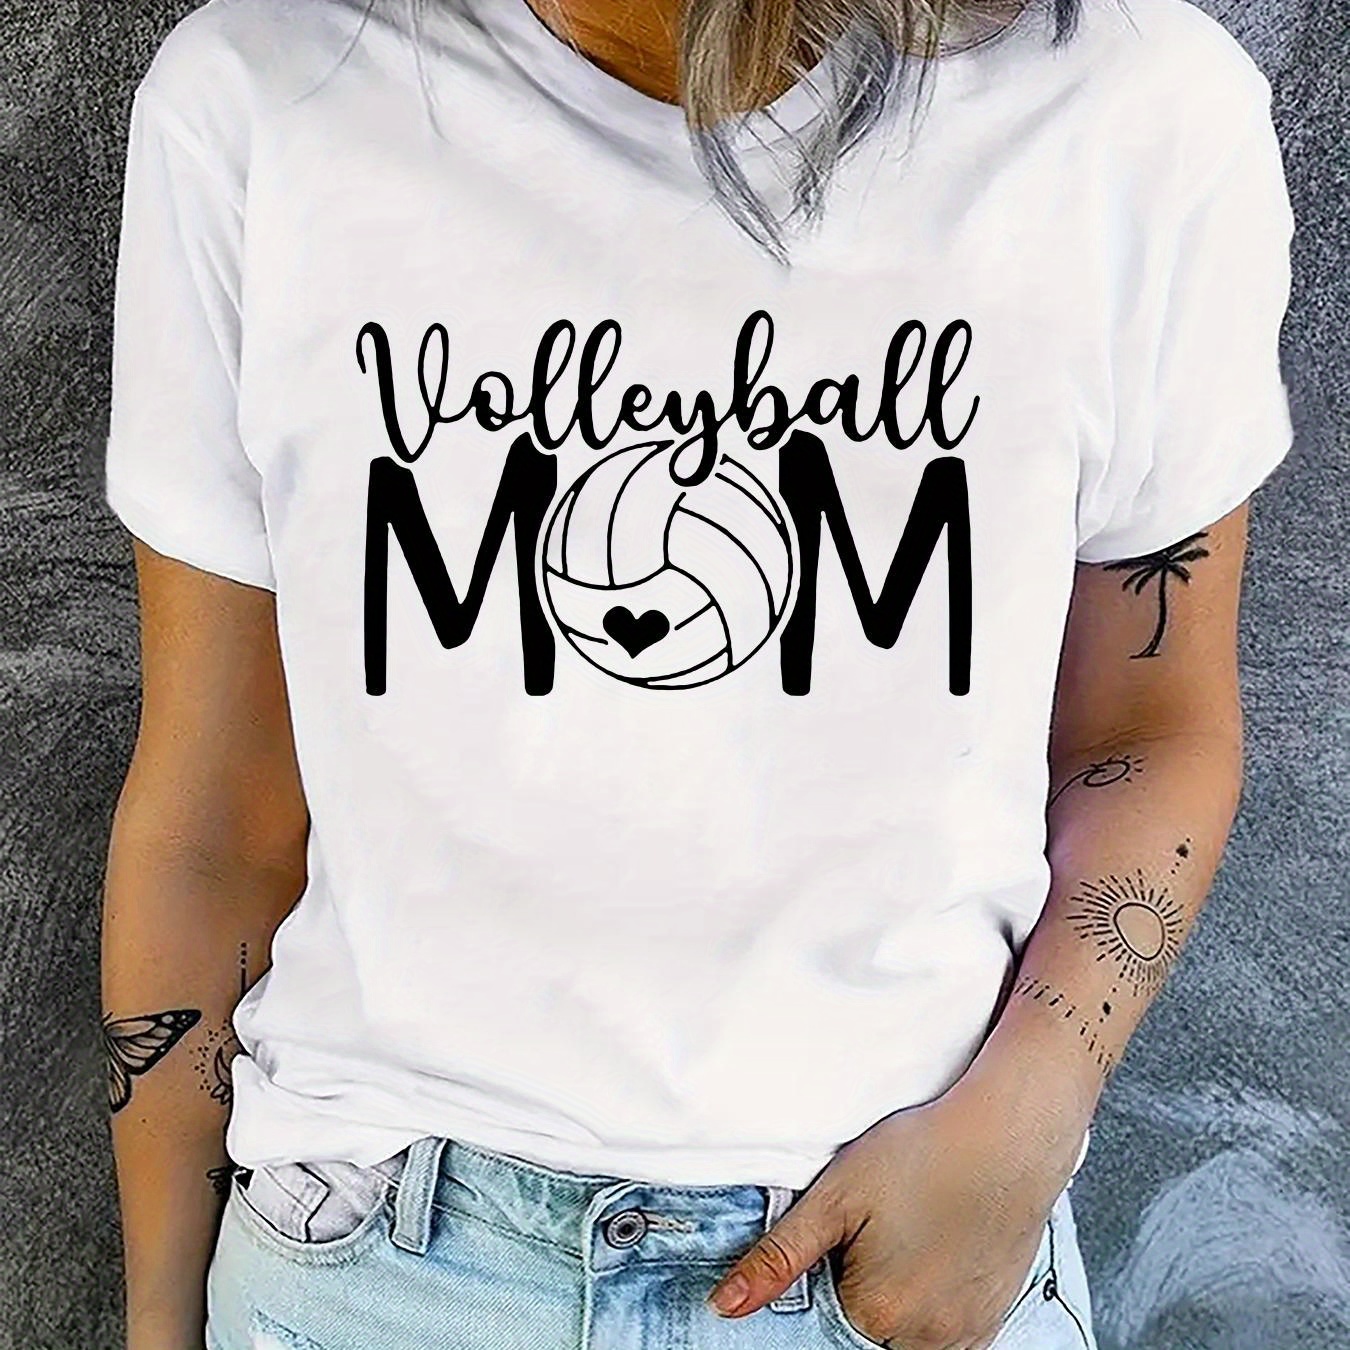 

Volleyball Mom Graphic Breathable Sports Tee, Crew Neck Short Sleeves Workout Running T-shirt Tops, Women's Activewear